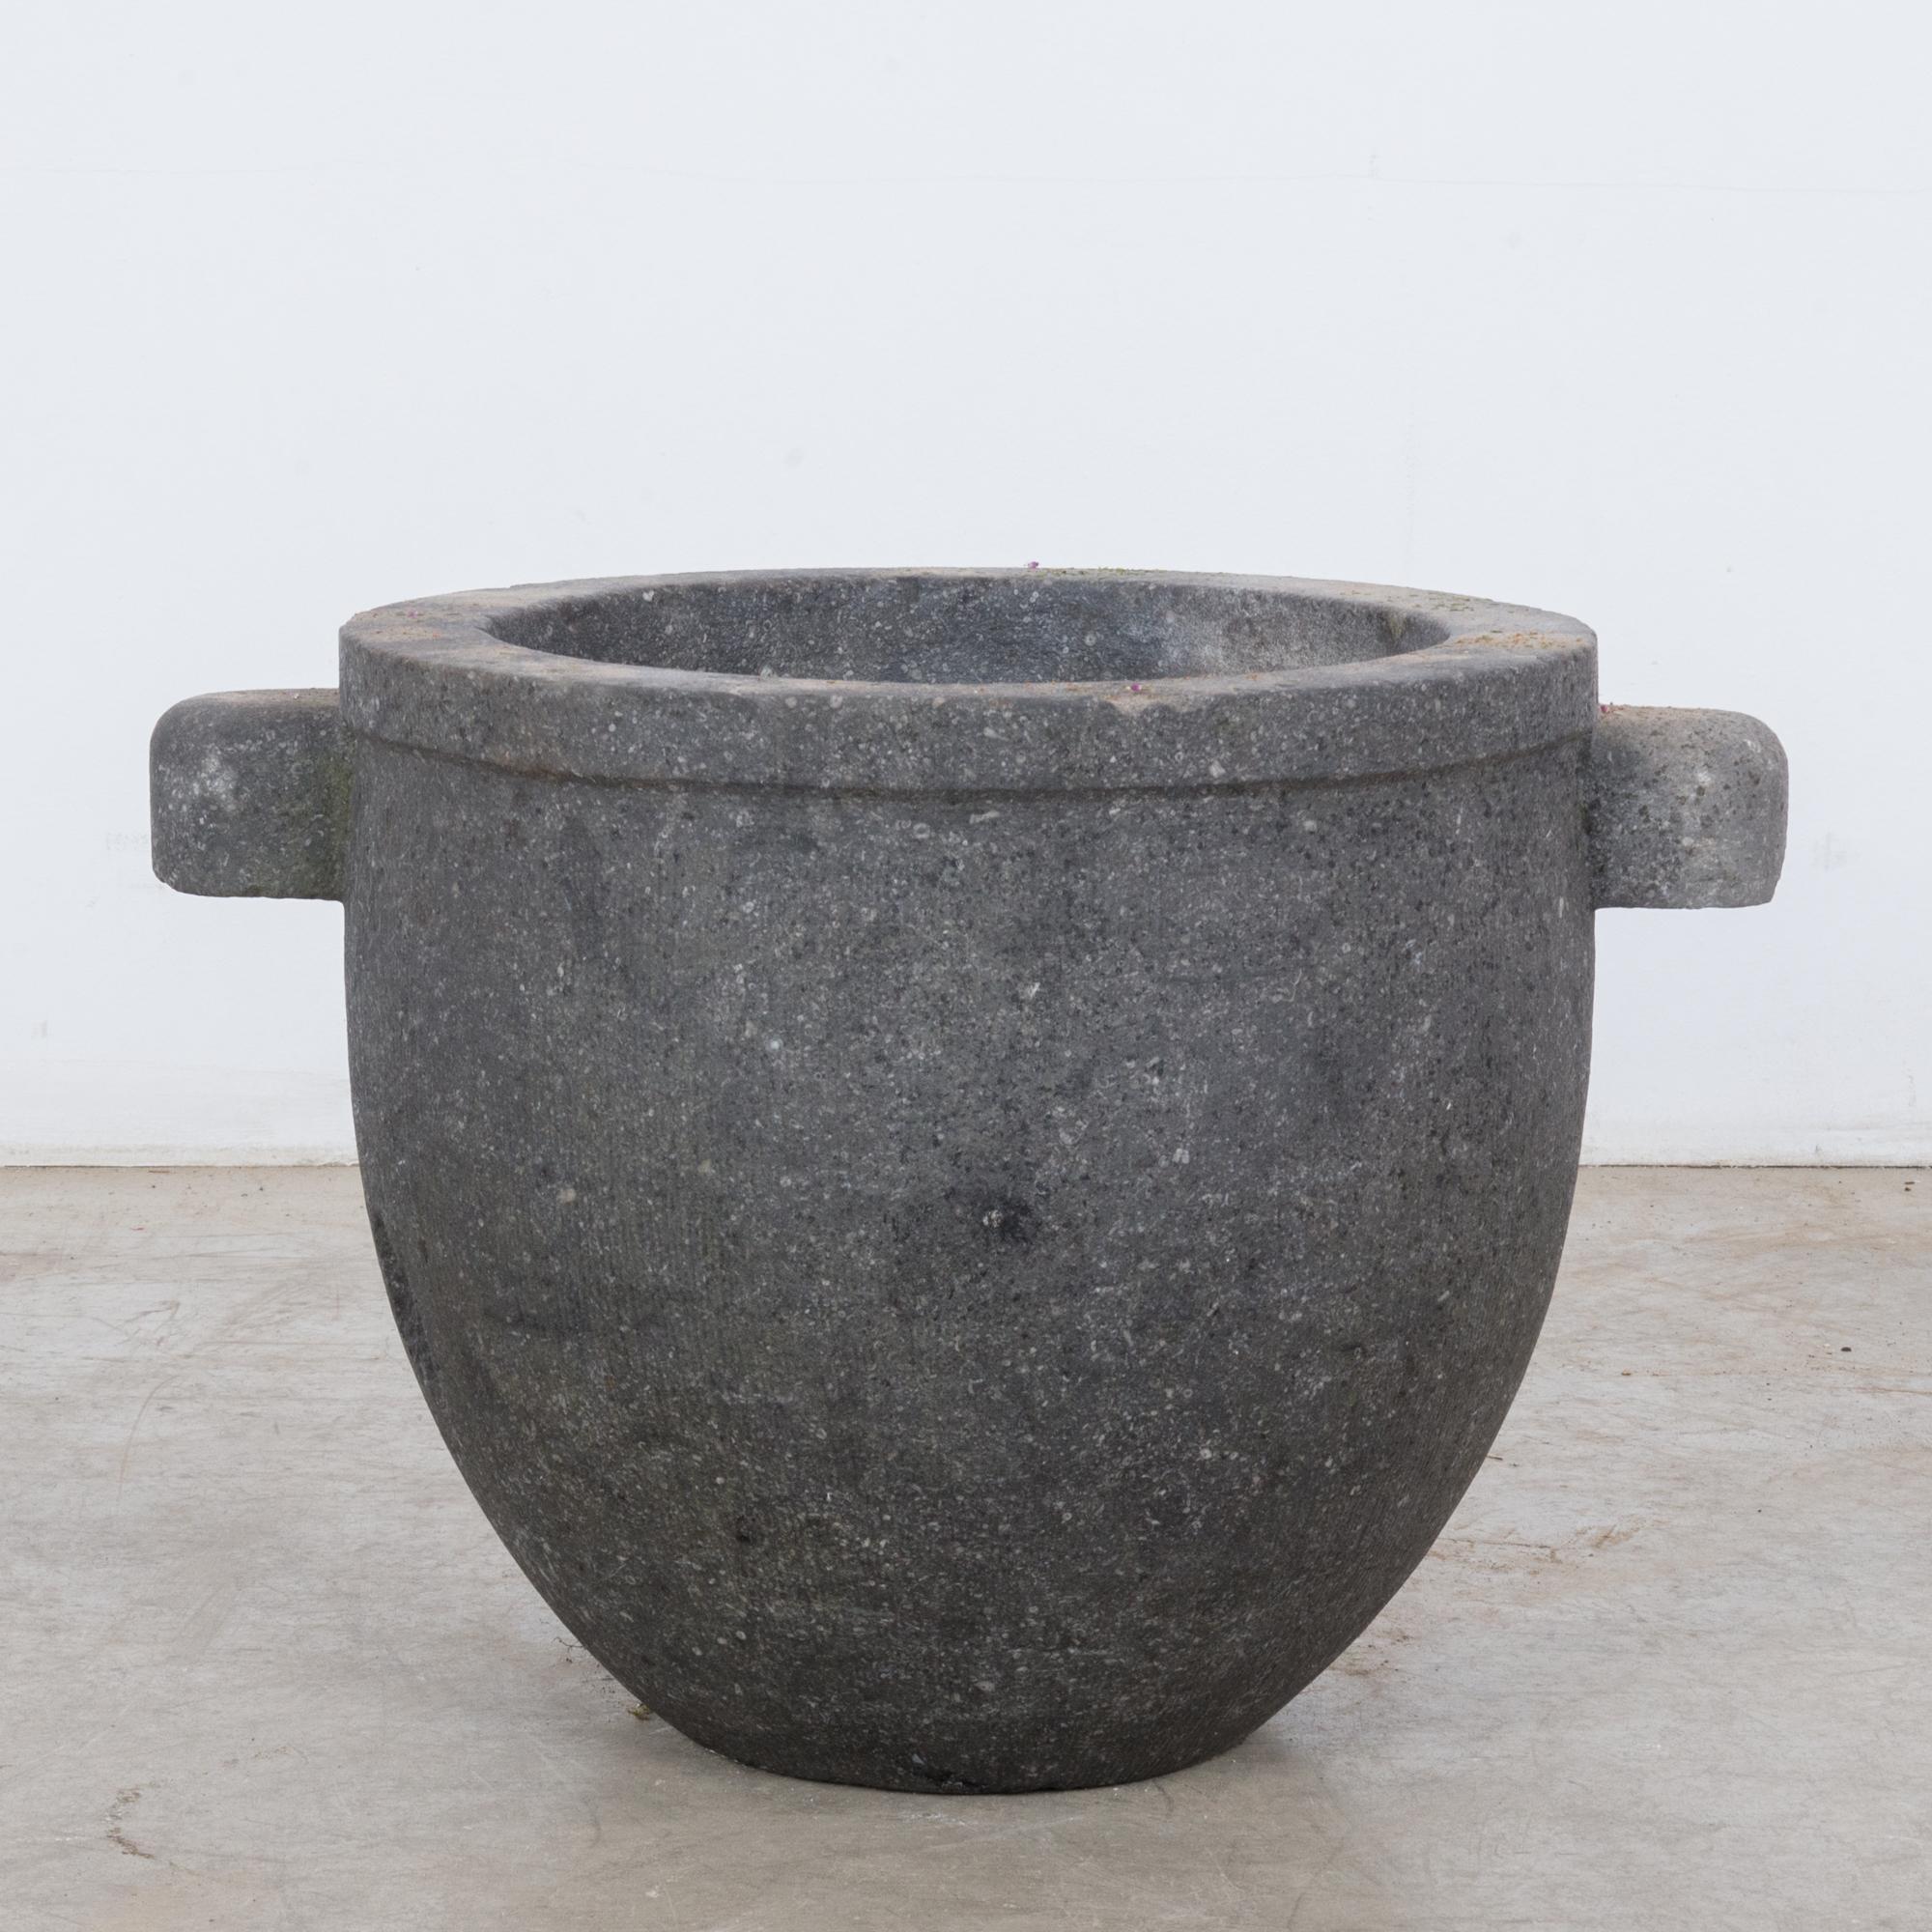 A mortar made of black stone from Belgium, circa 1800. A smooth stone vessel with two blunt handles and a gentle rim. A very subtle texture speaks to the craftsmanship with which this piece was made. The stylish, Minimalist shape, coupled with its